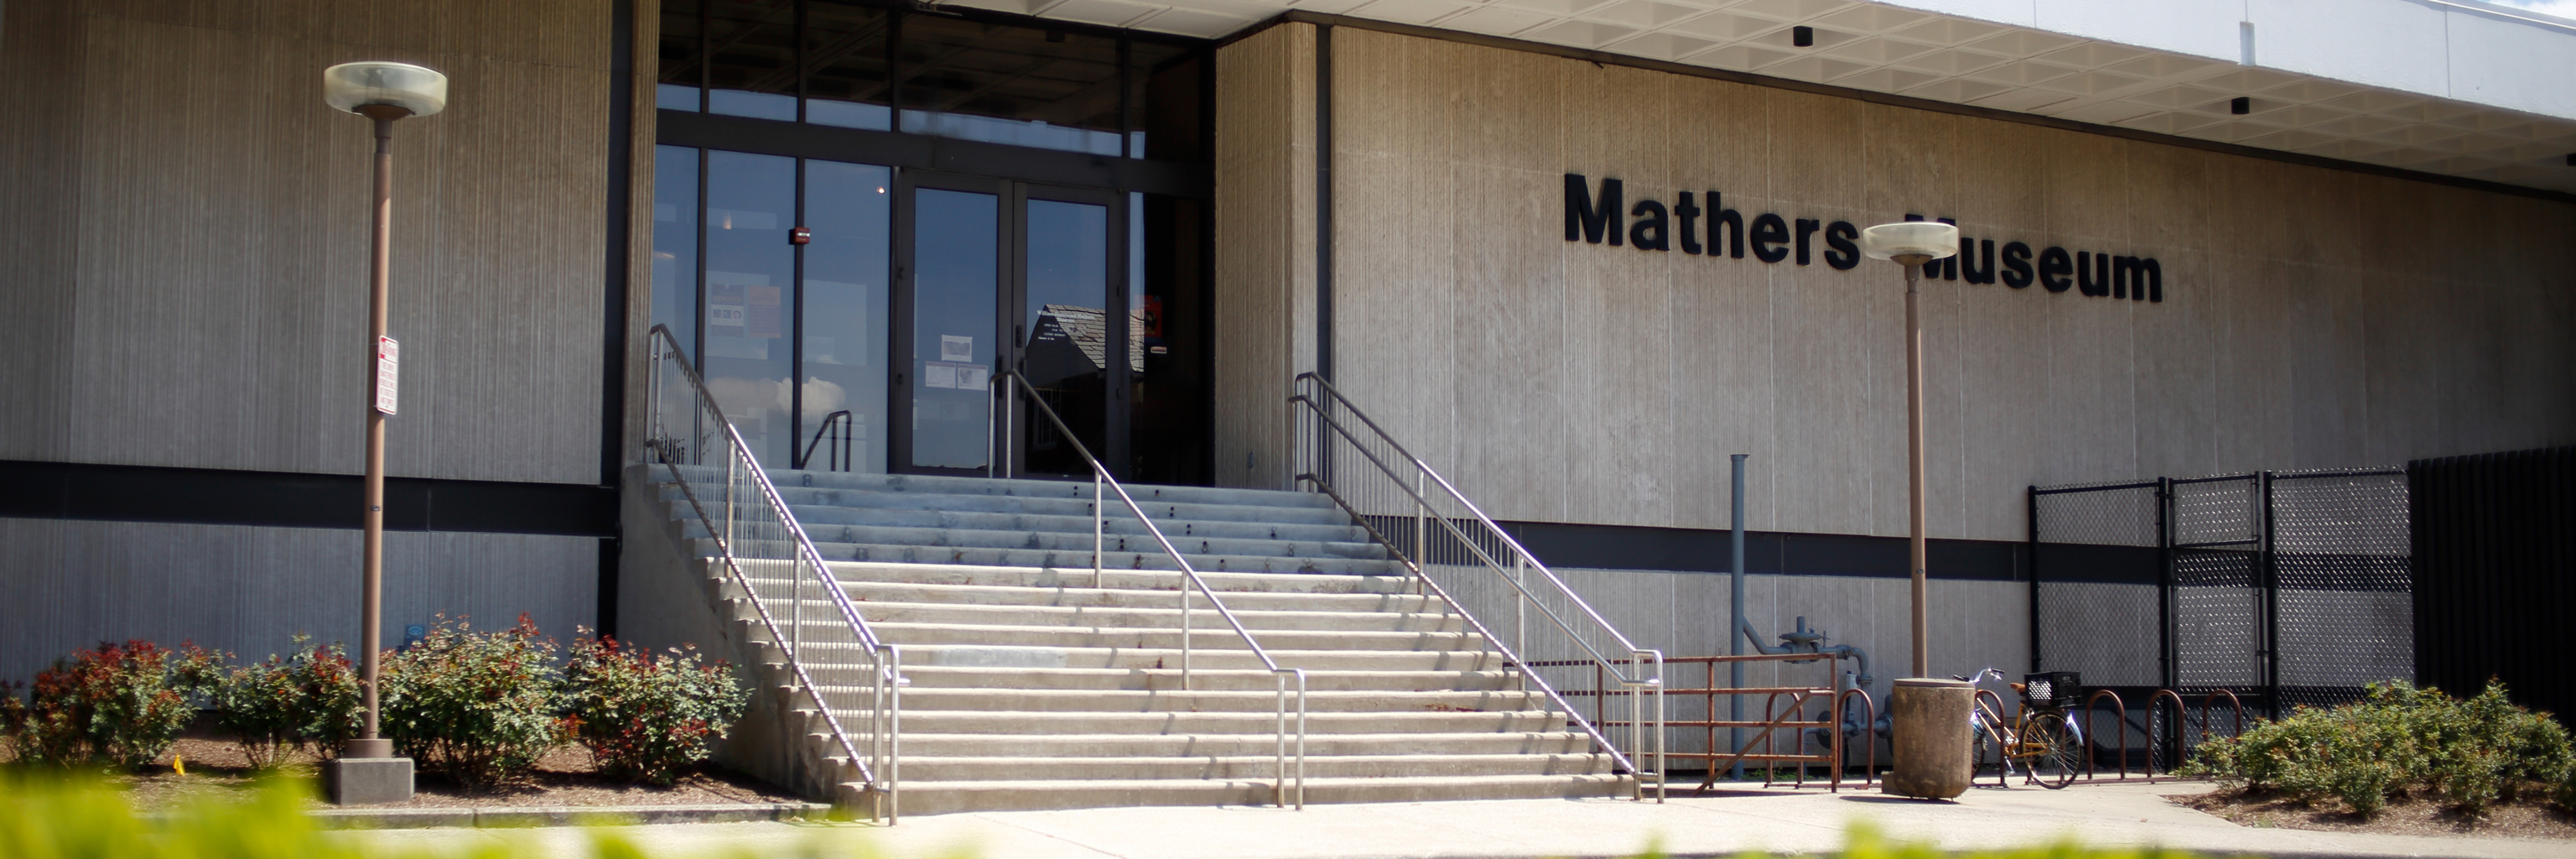 Mathers Museum entrance